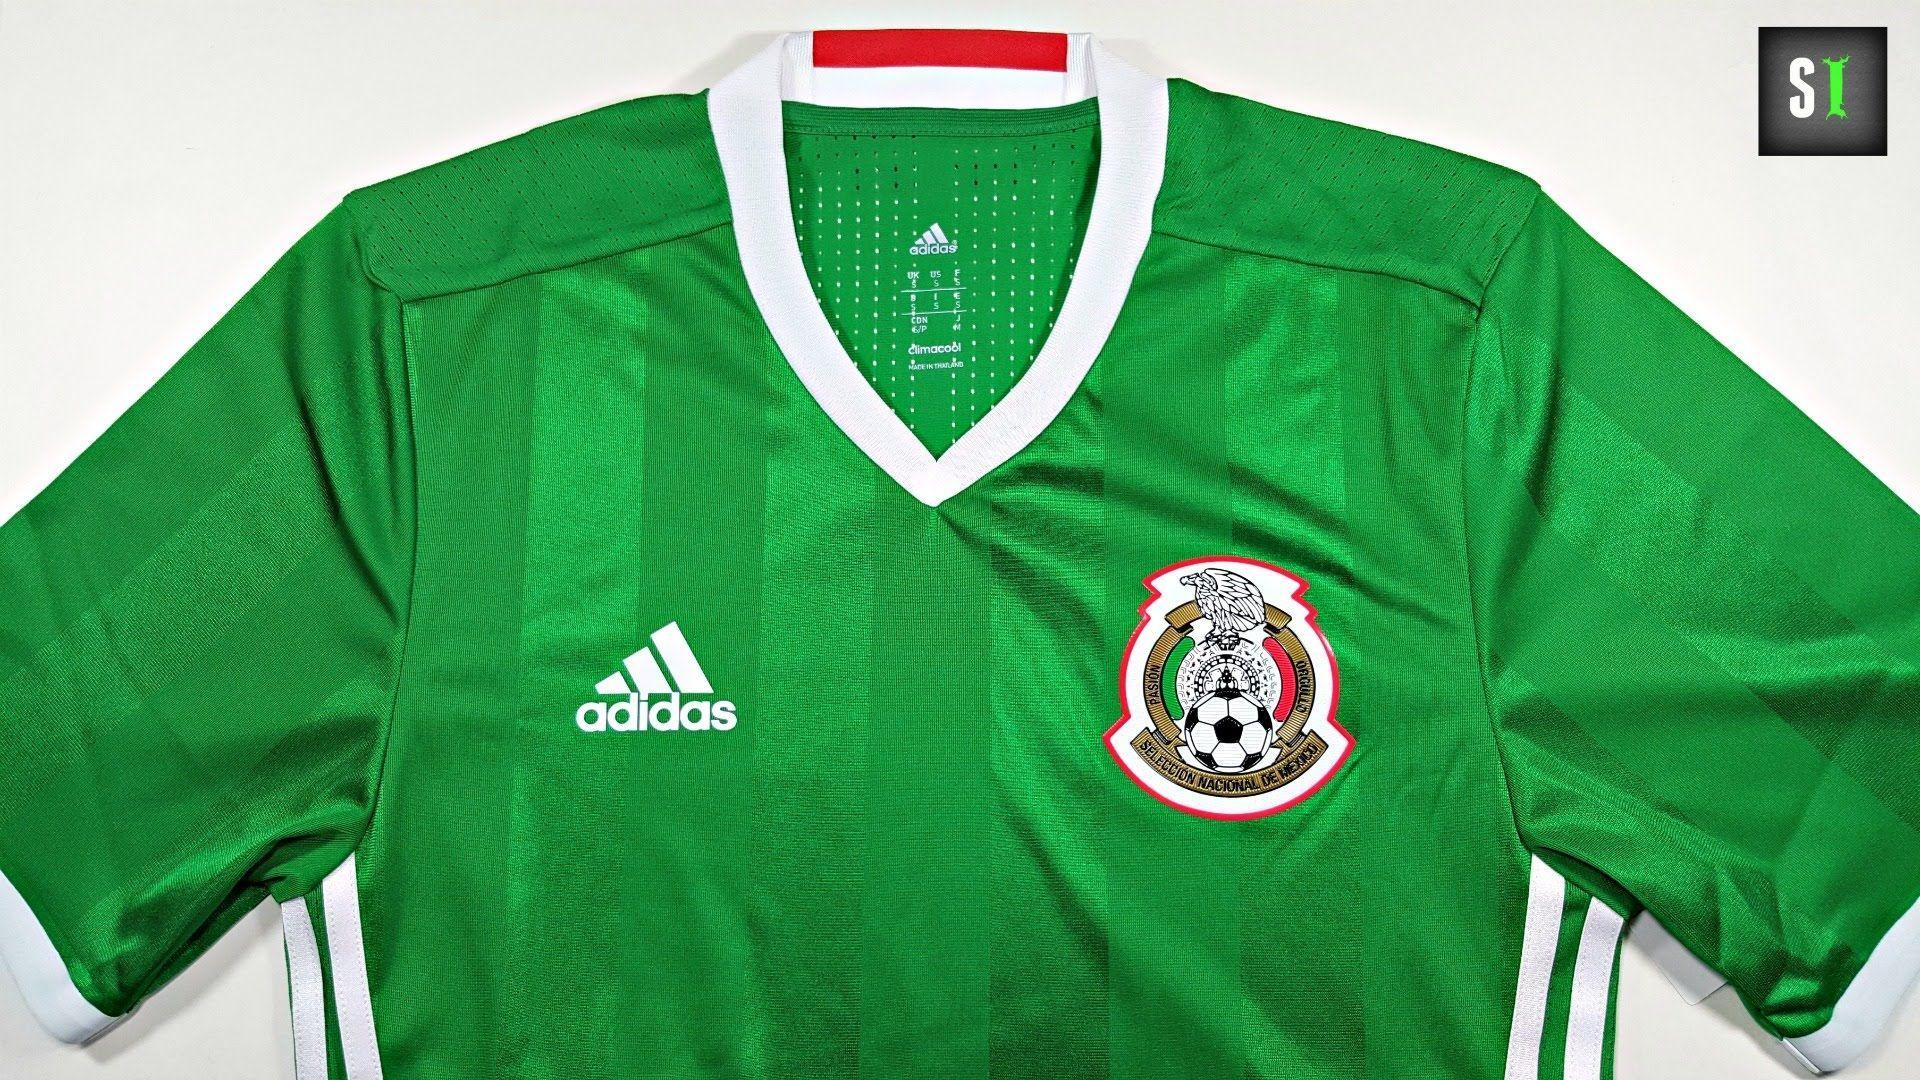 Adidas Mexico 2016 Authentic Home Jersey Review + GIVEAWAY!